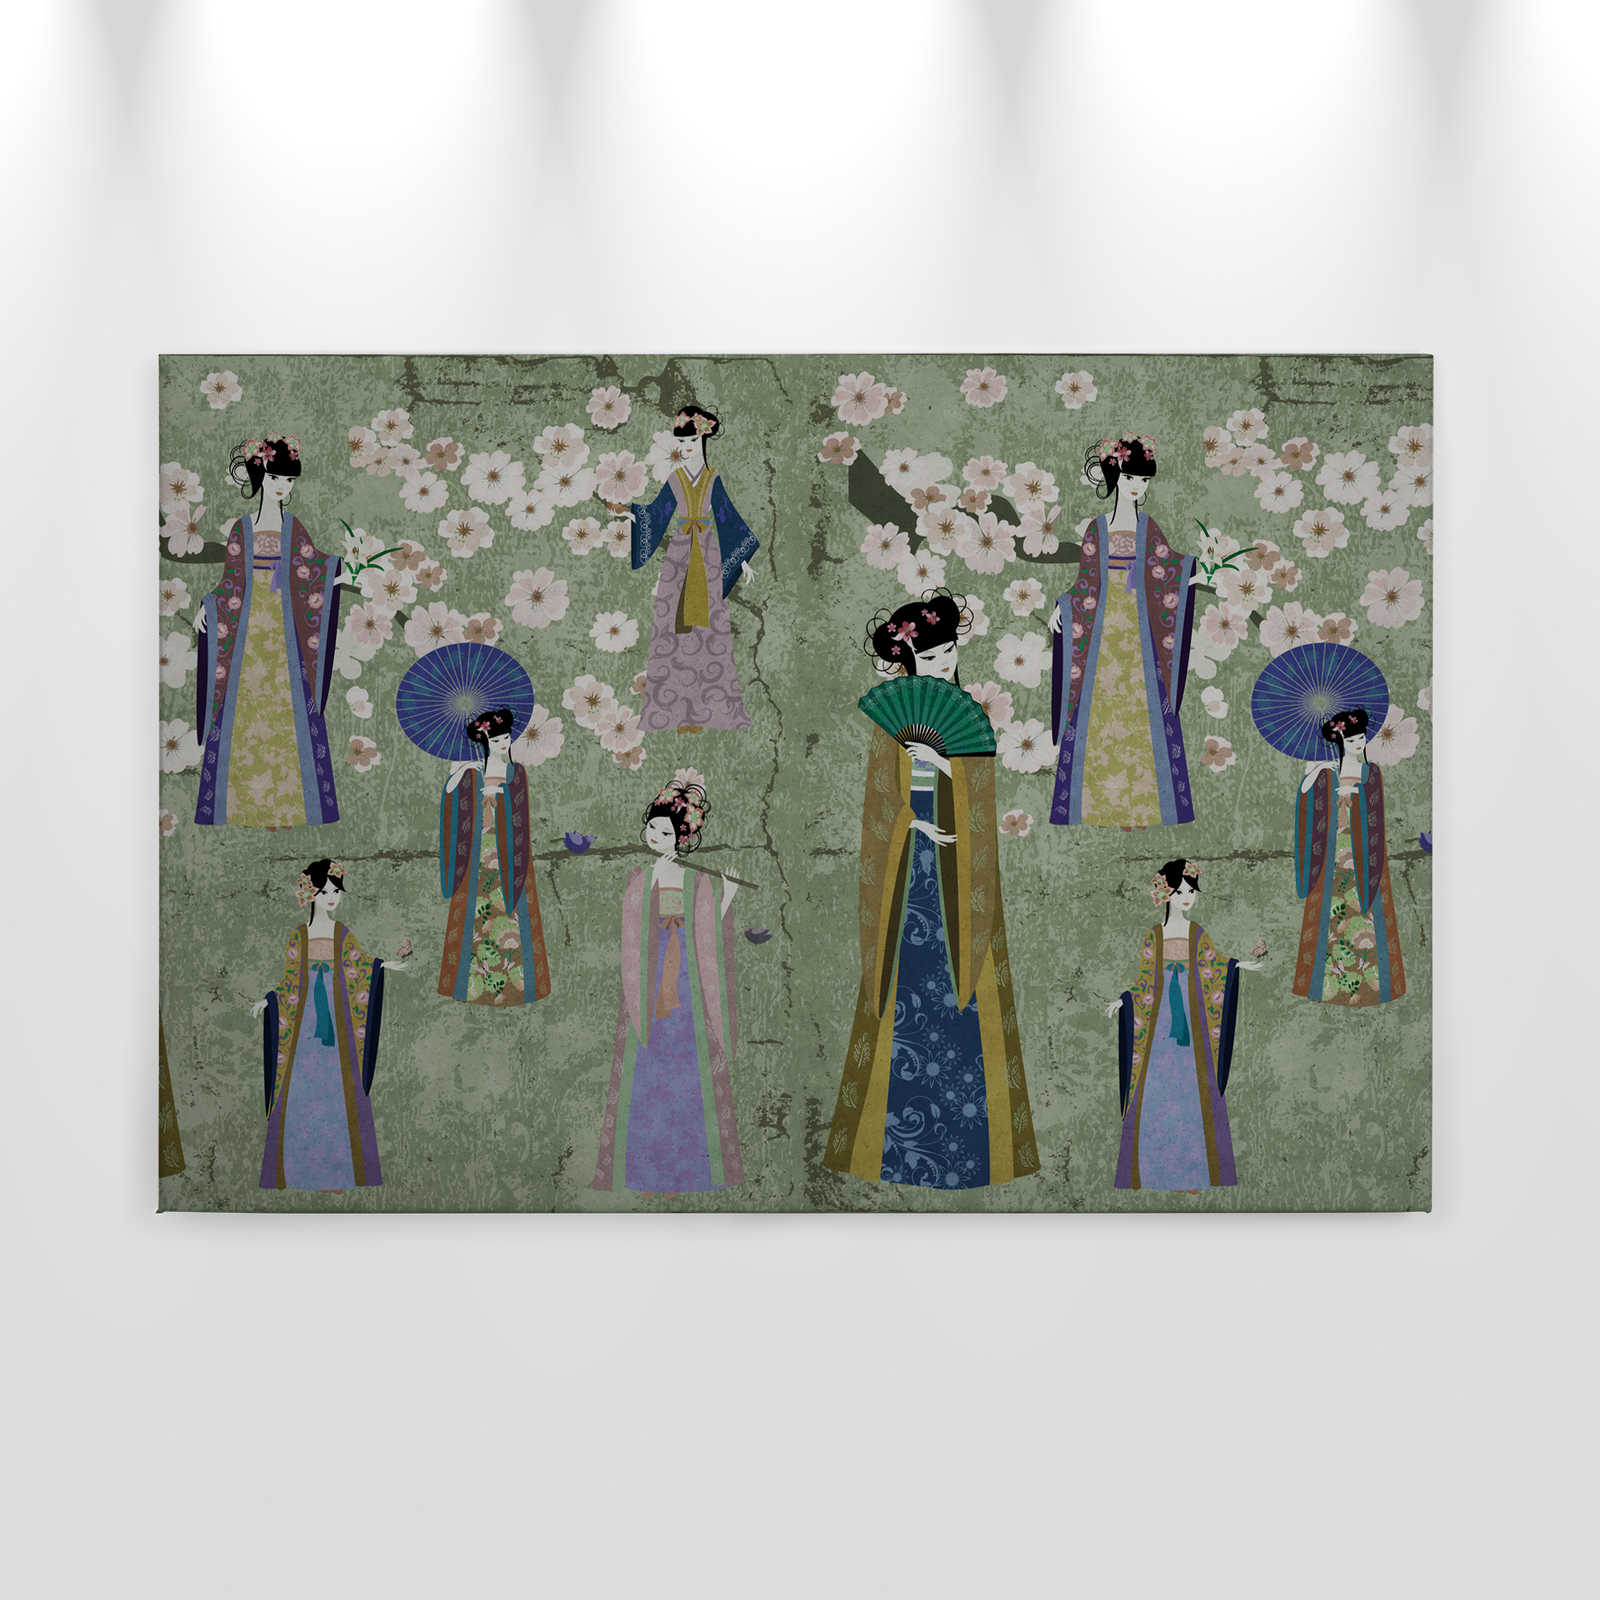             Canvas painting Japan Comic with cherry blossoms | green, blue - 0,90 m x 0,60 m
        